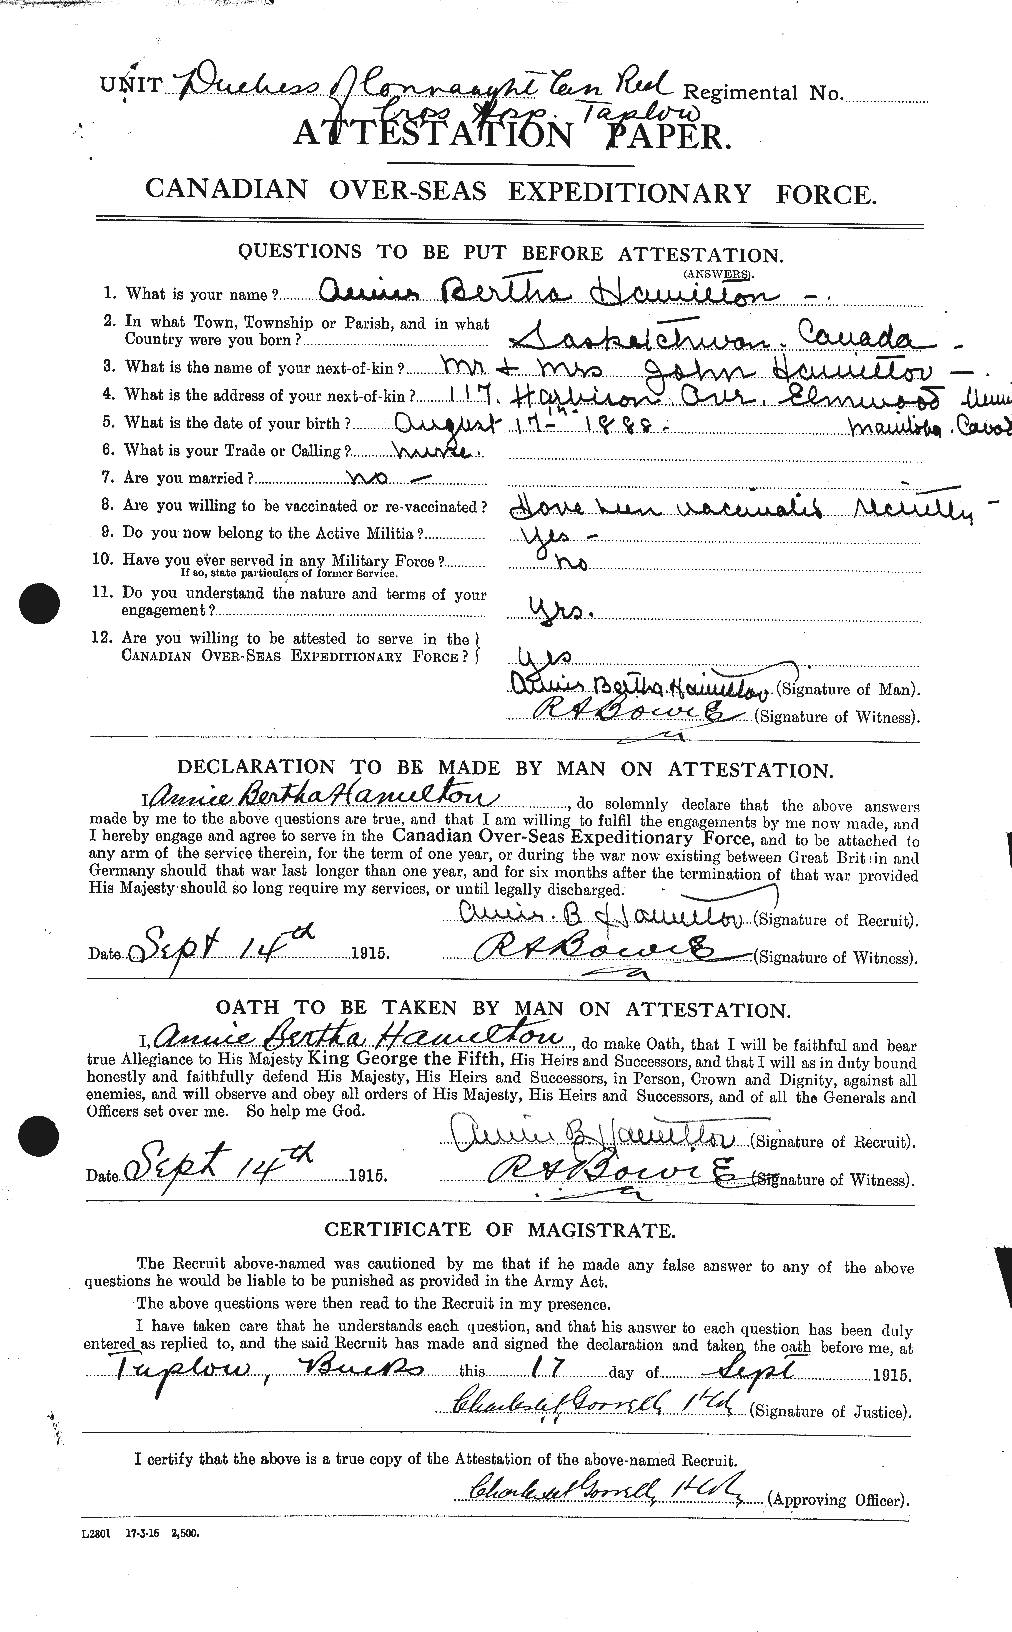 Personnel Records of the First World War - CEF 375241a